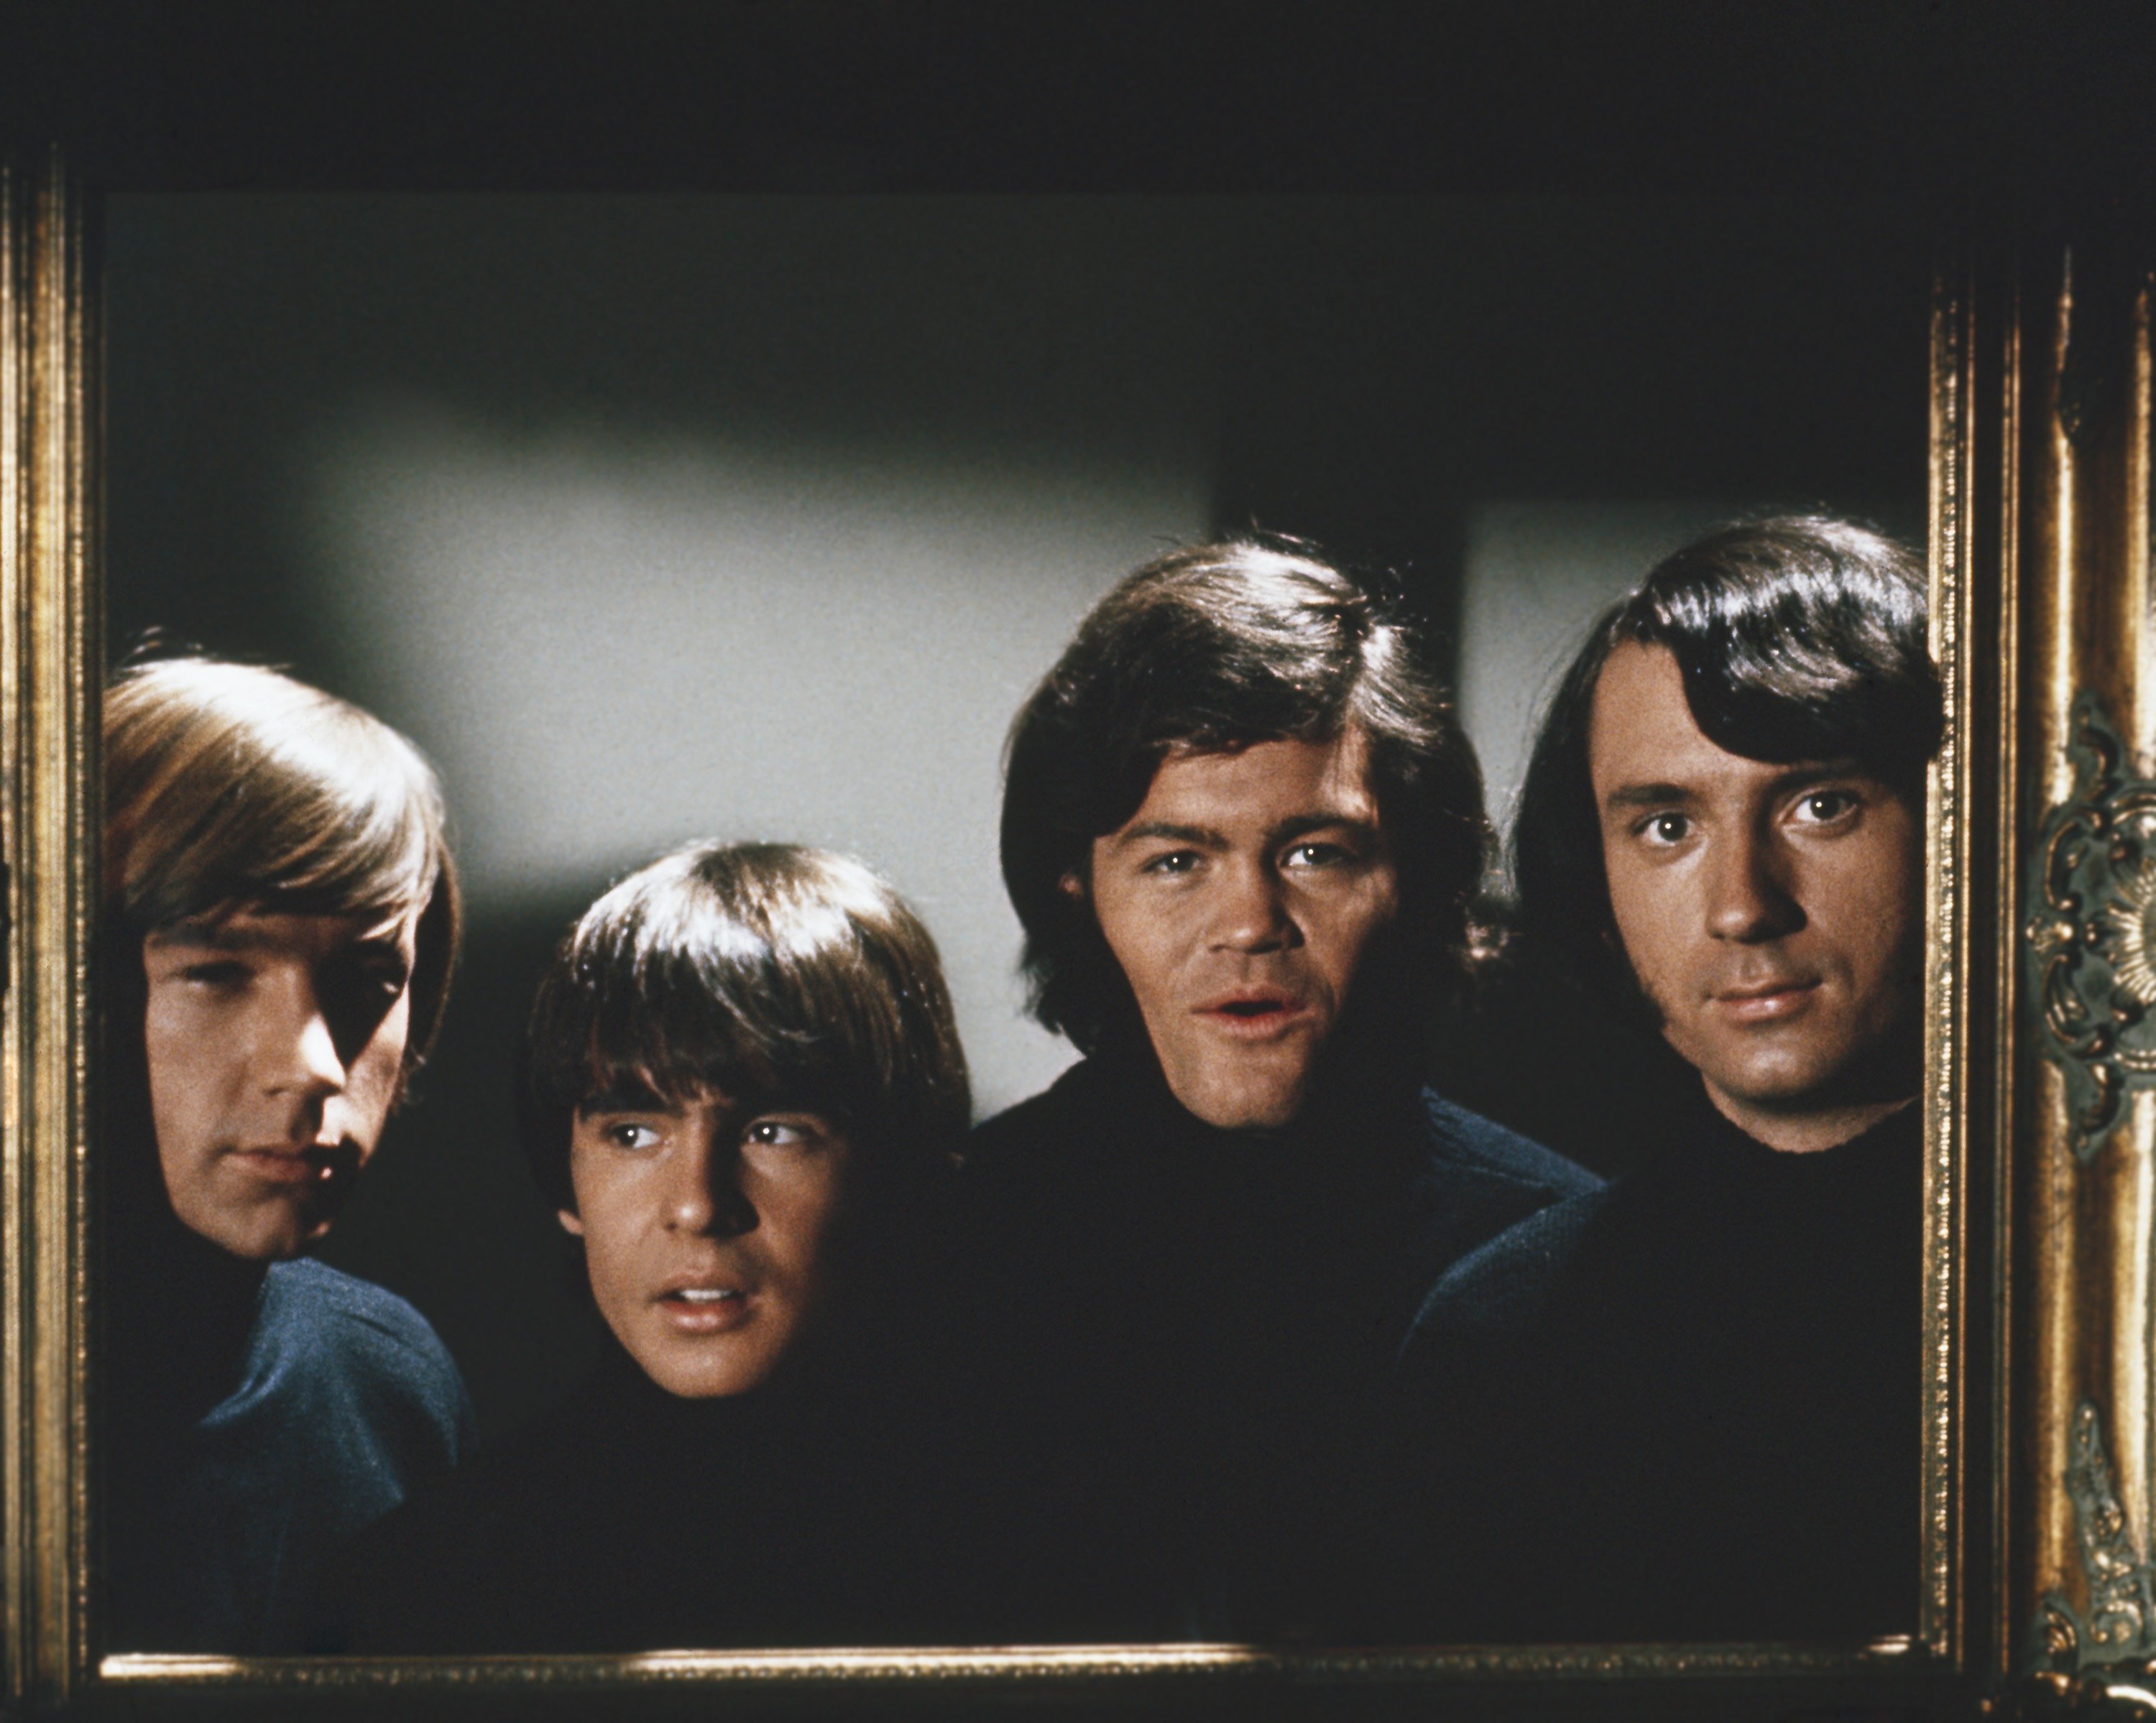 The Monkees' Peter Tork, Davy Jones, Micky Dolenz, and Mike Nesmith